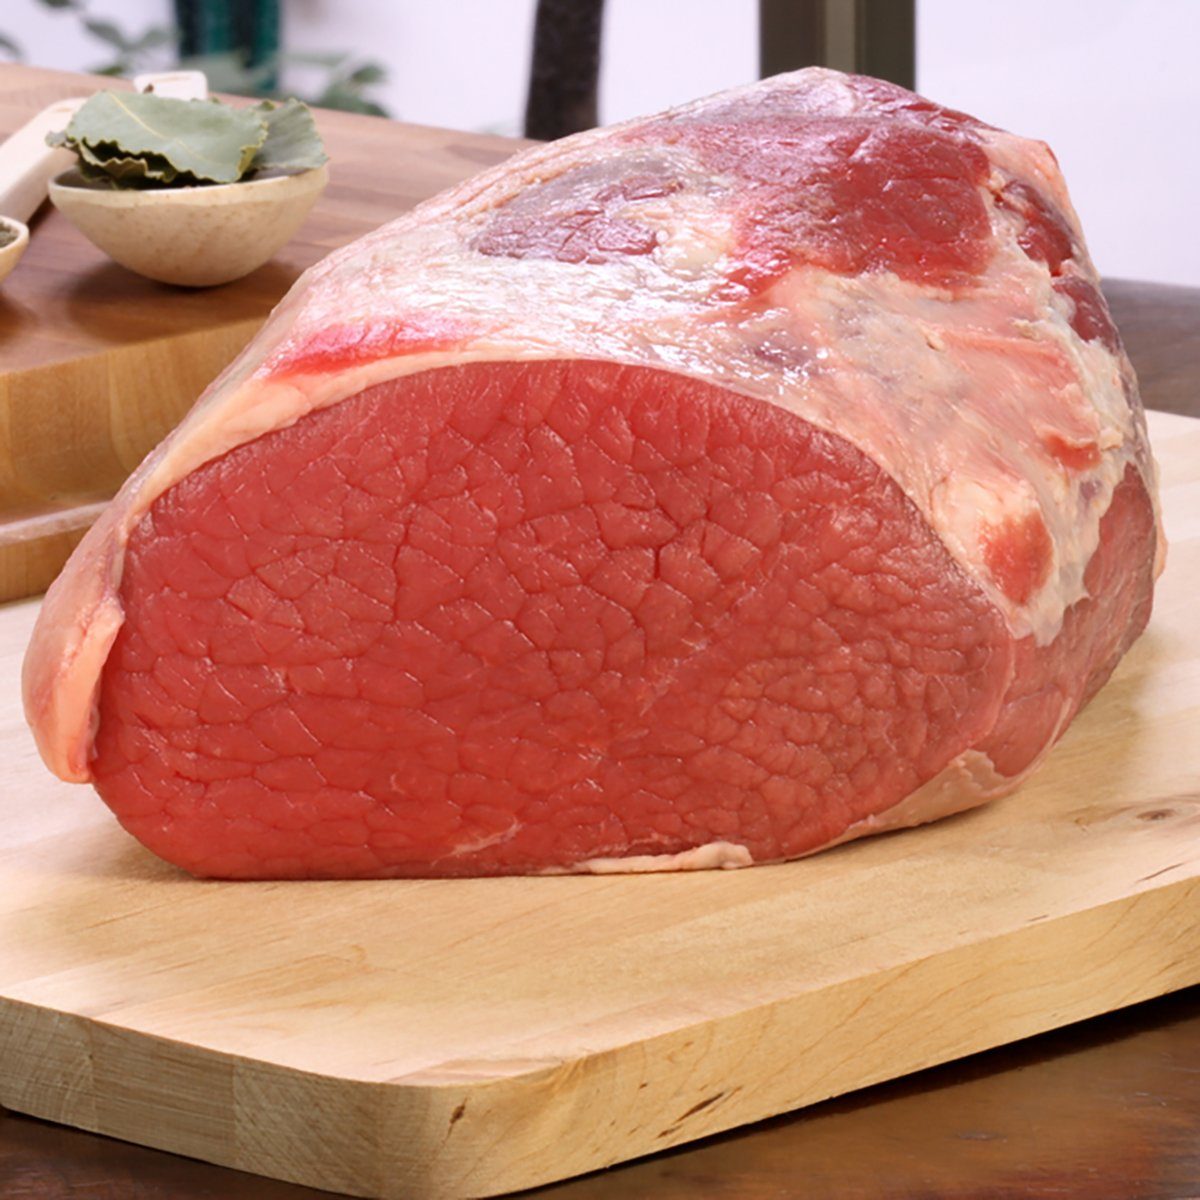 raw fresh and juicy eye of round roast steak or beef with ingredients on background perfect for baking and roasting